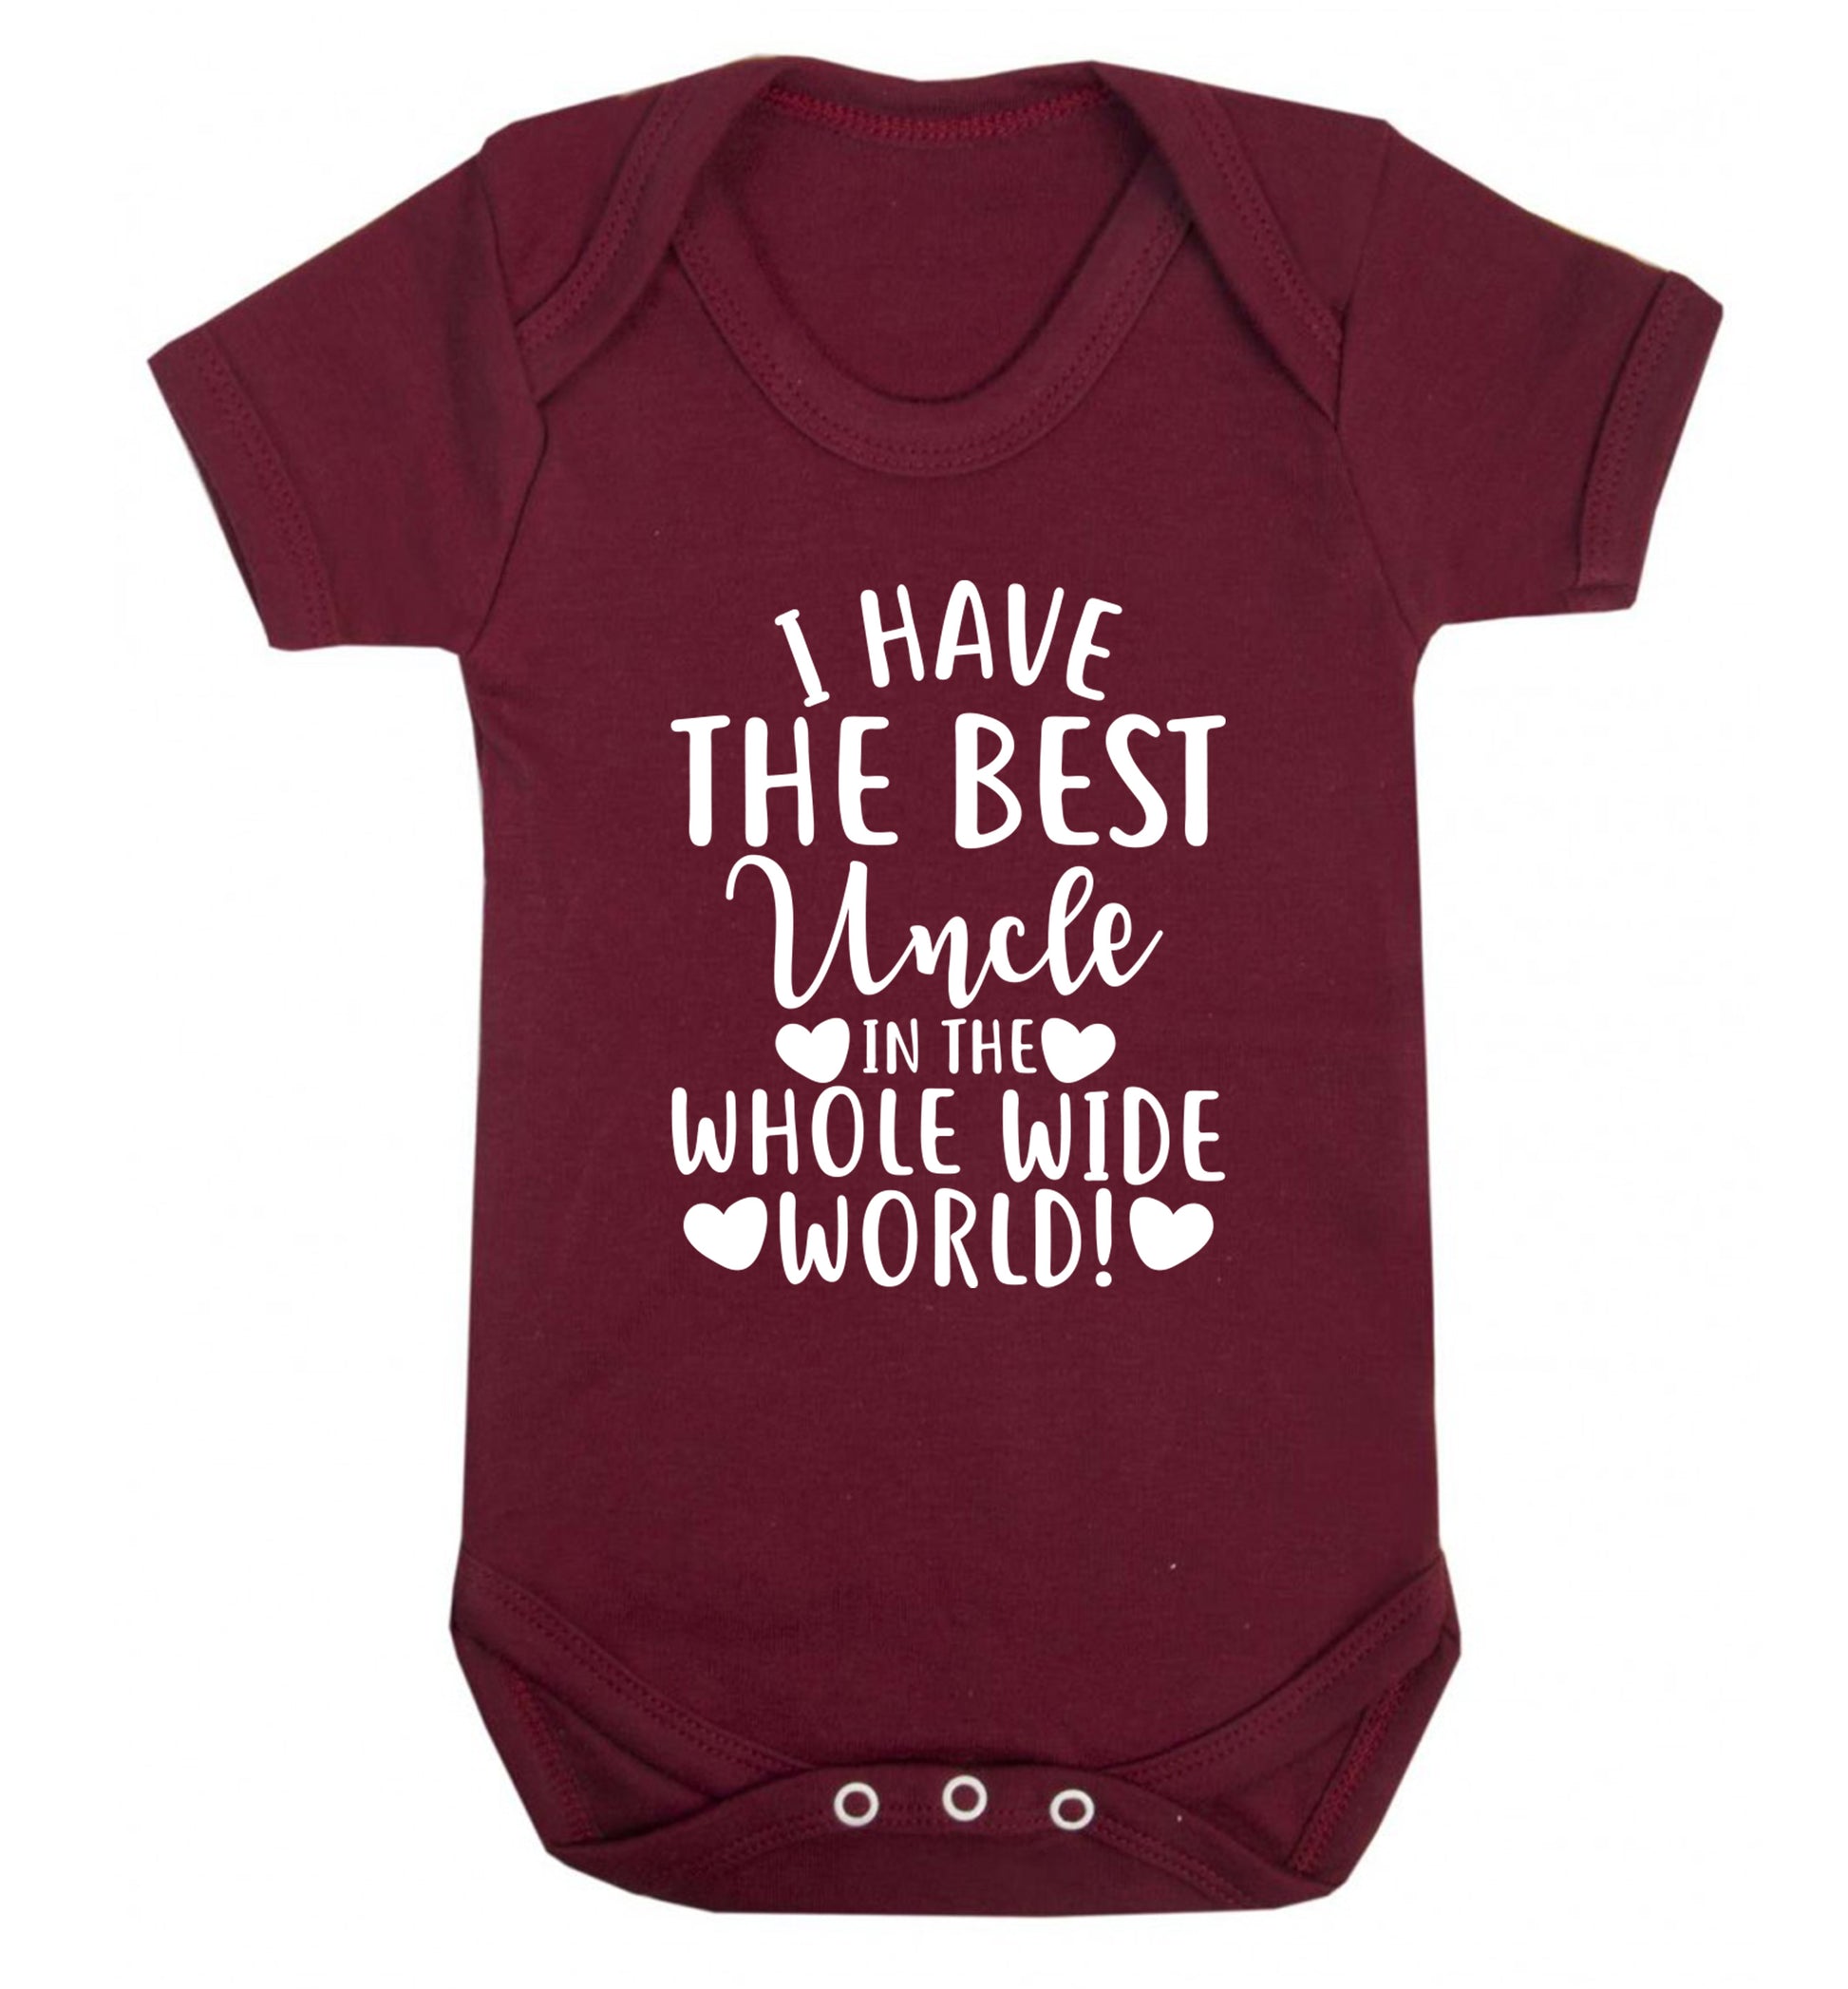 I have the best uncle in the whole wide world! Baby Vest maroon 18-24 months